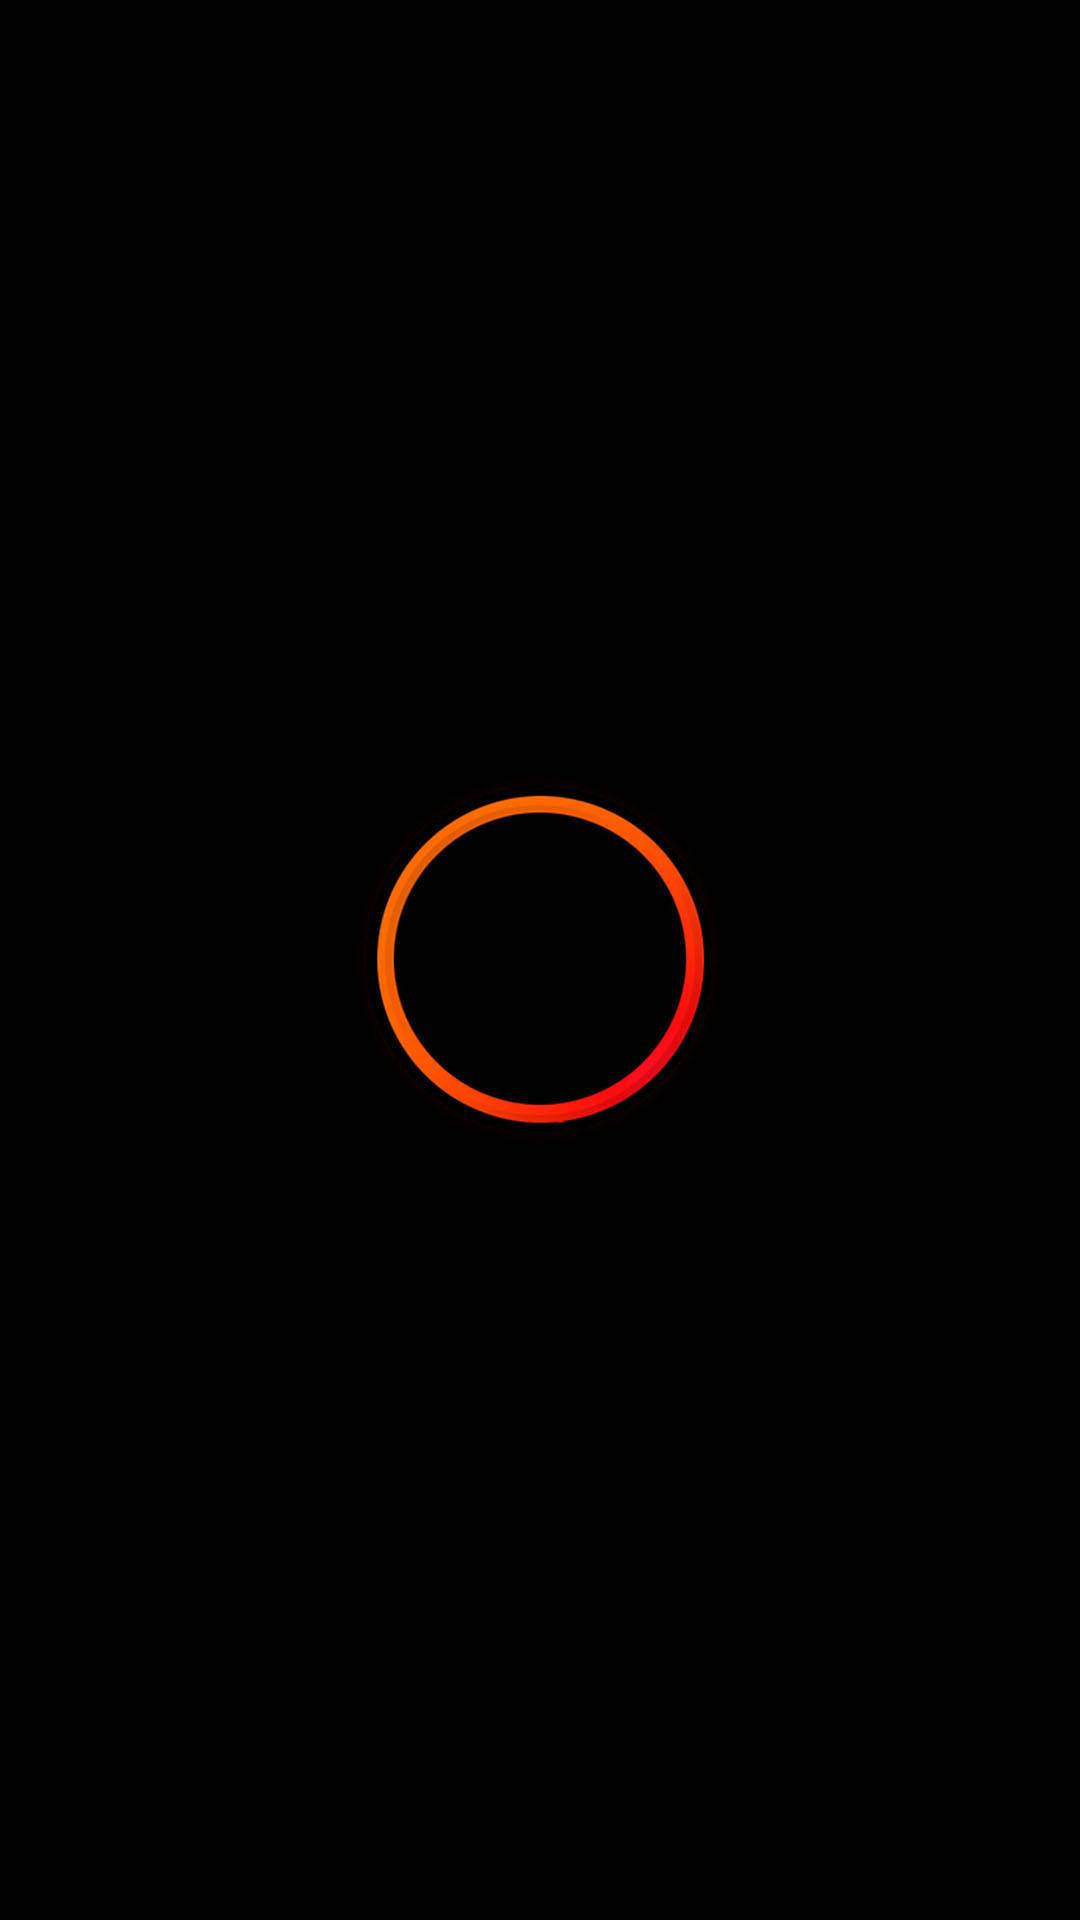 Red Circle Minimalist Android